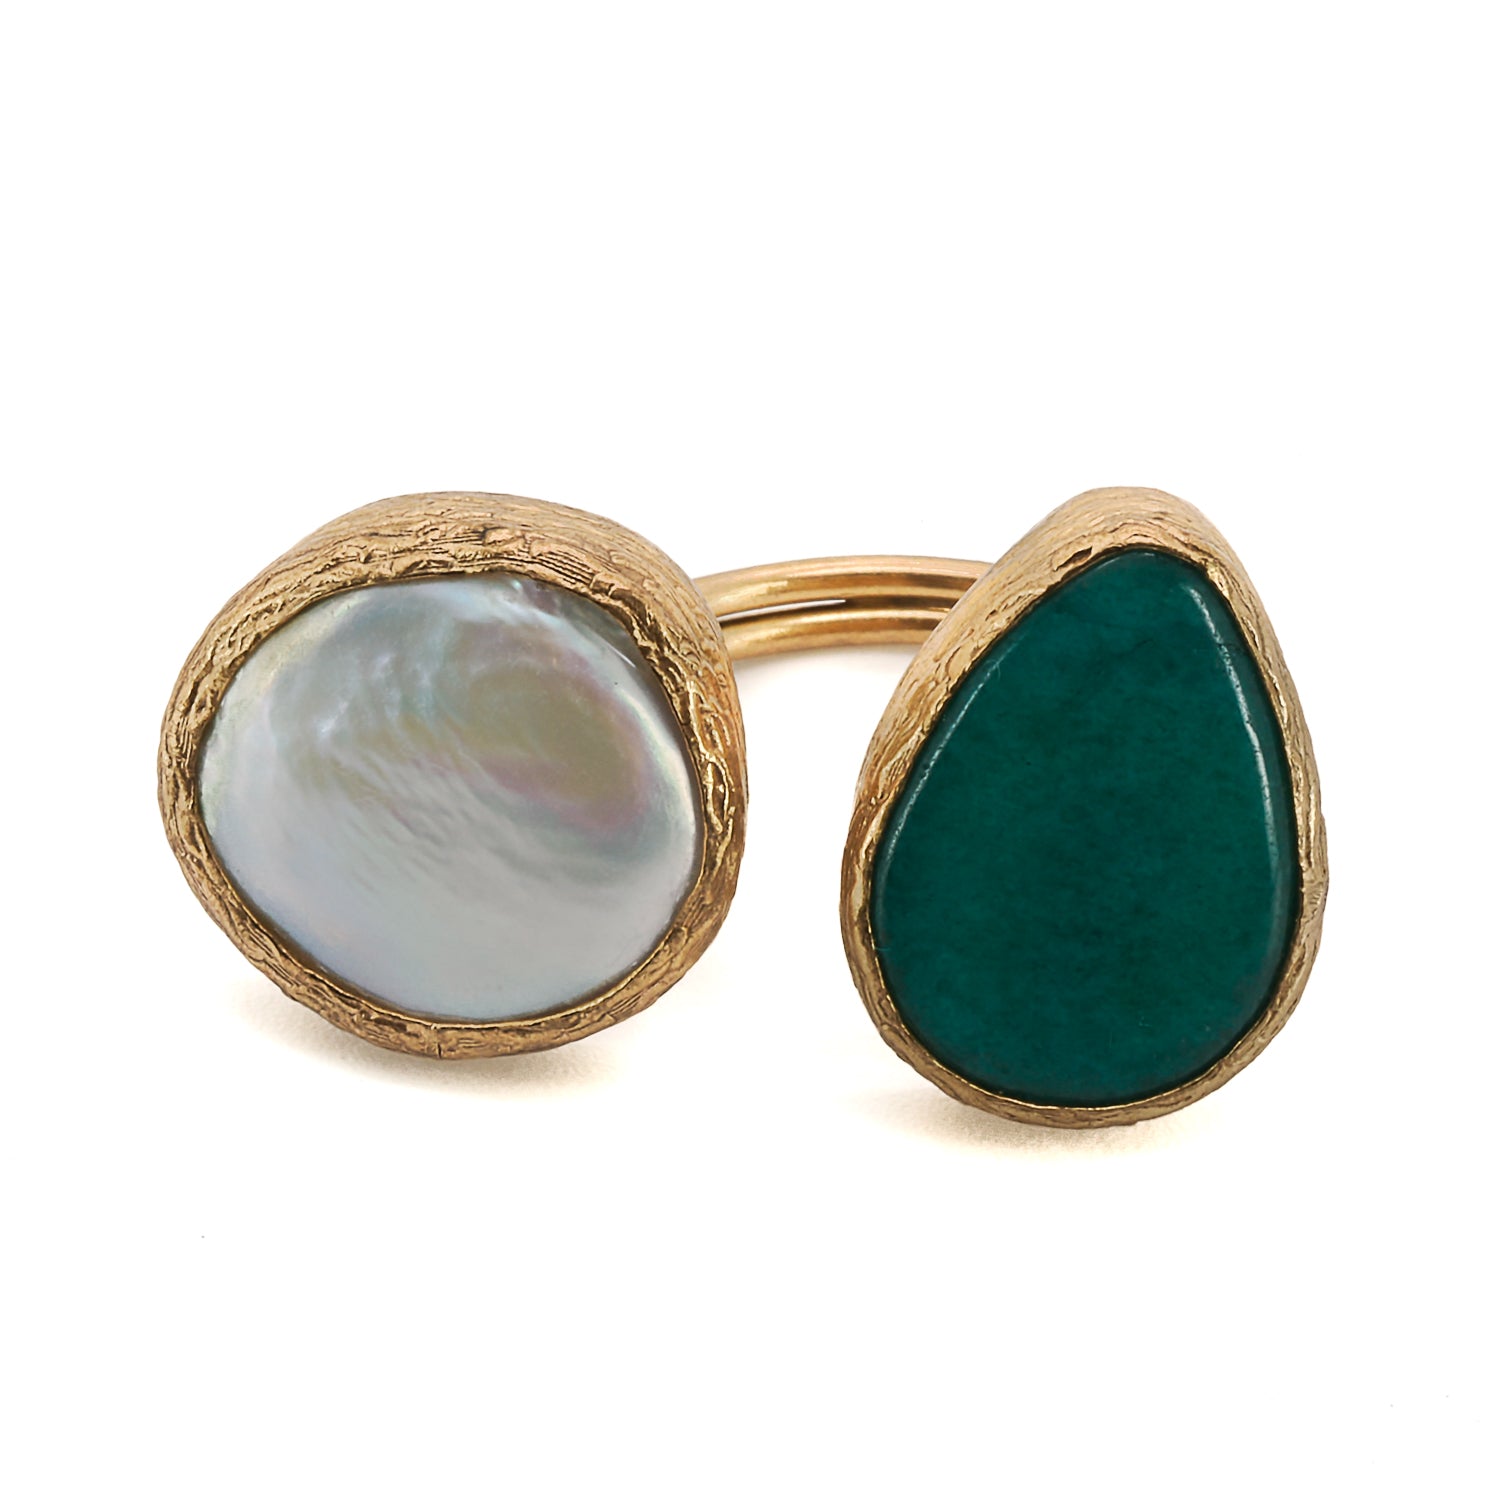 Close-up view of the Double Gemstone Gaia Ring featuring a lustrous gold plated pearl and a striking jade stone.